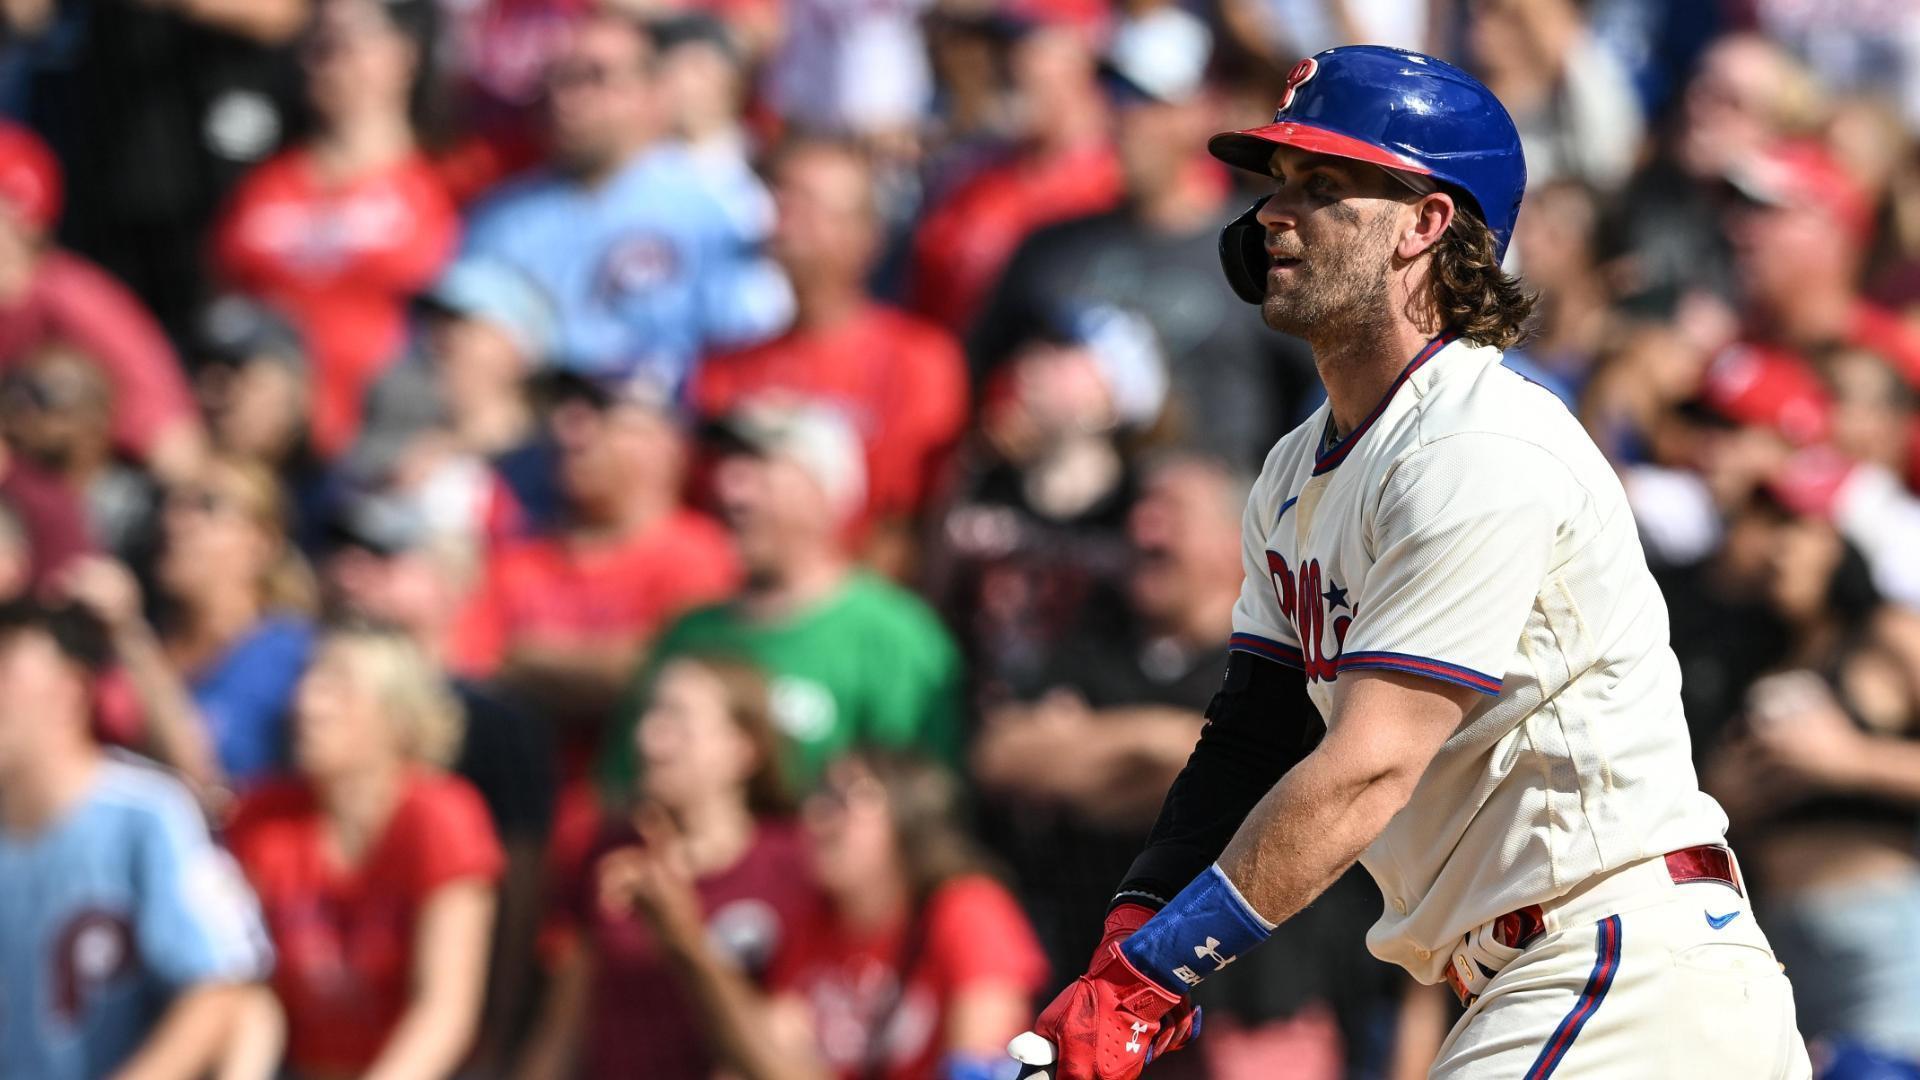 Turner hits tying HR in 9th, Bohm wins it in 10th as Phillies